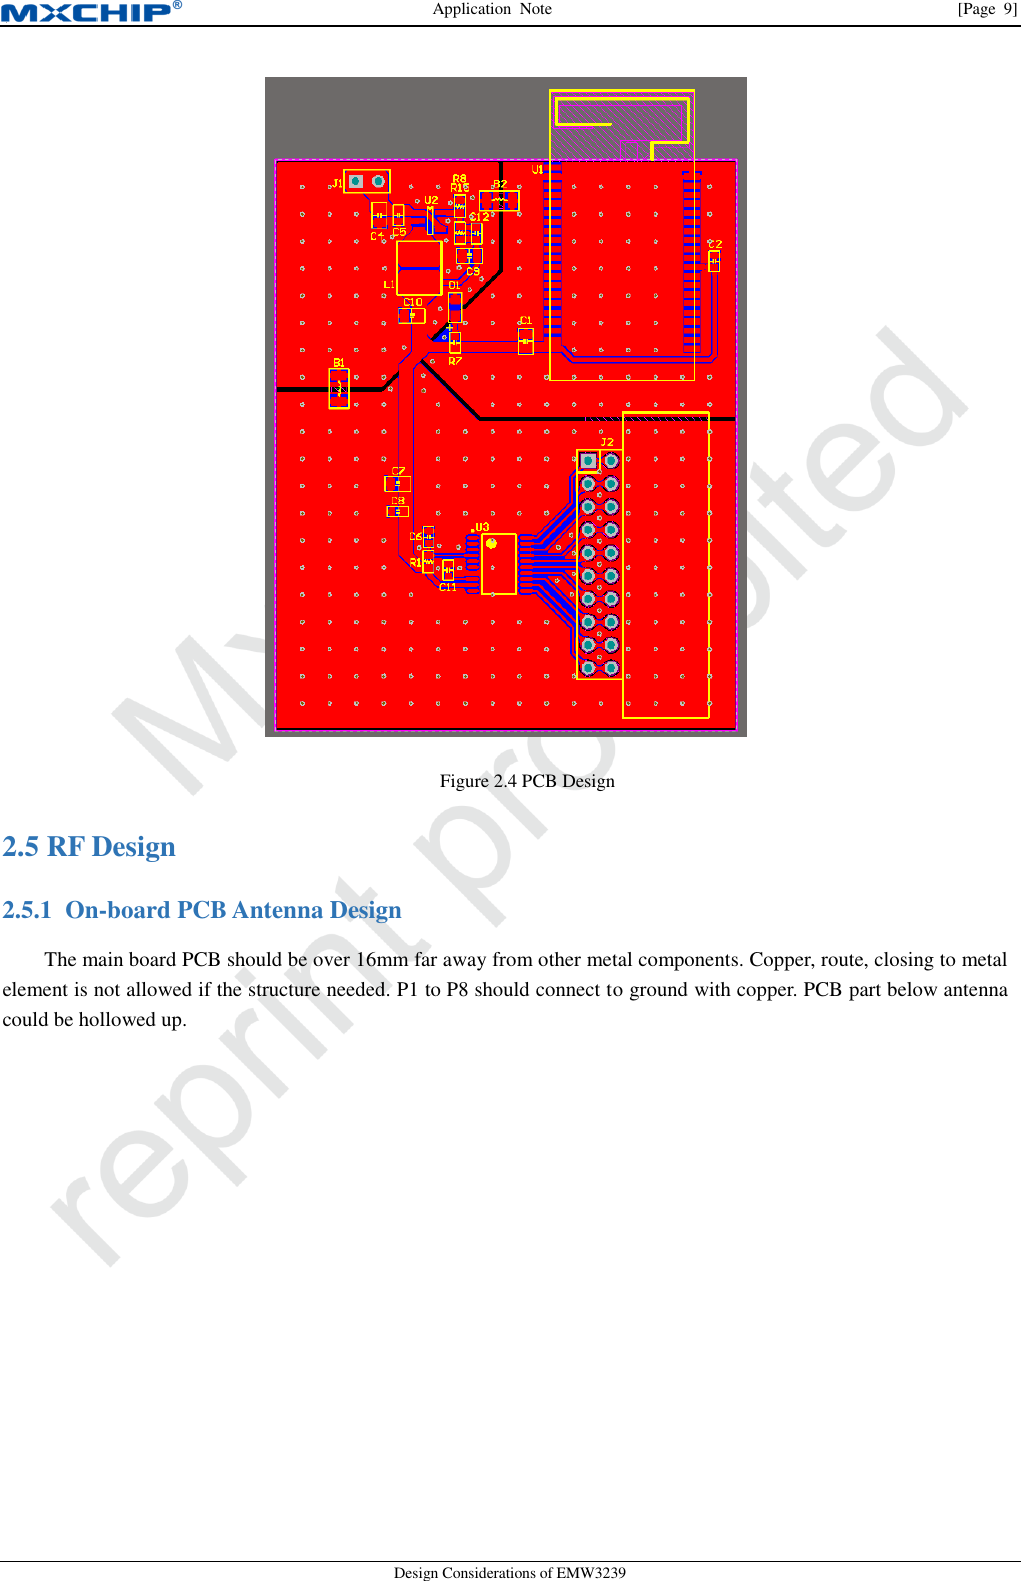 Application  Note                [Page  9] Design Considerations of EMW3239  Figure 2.4 PCB Design  RF Design 2.52.5.1 On-board PCB Antenna Design The main board PCB should be over 16mm far away from other metal components. Copper, route, closing to metal element is not allowed if the structure needed. P1 to P8 should connect to ground with copper. PCB part below antenna could be hollowed up. 